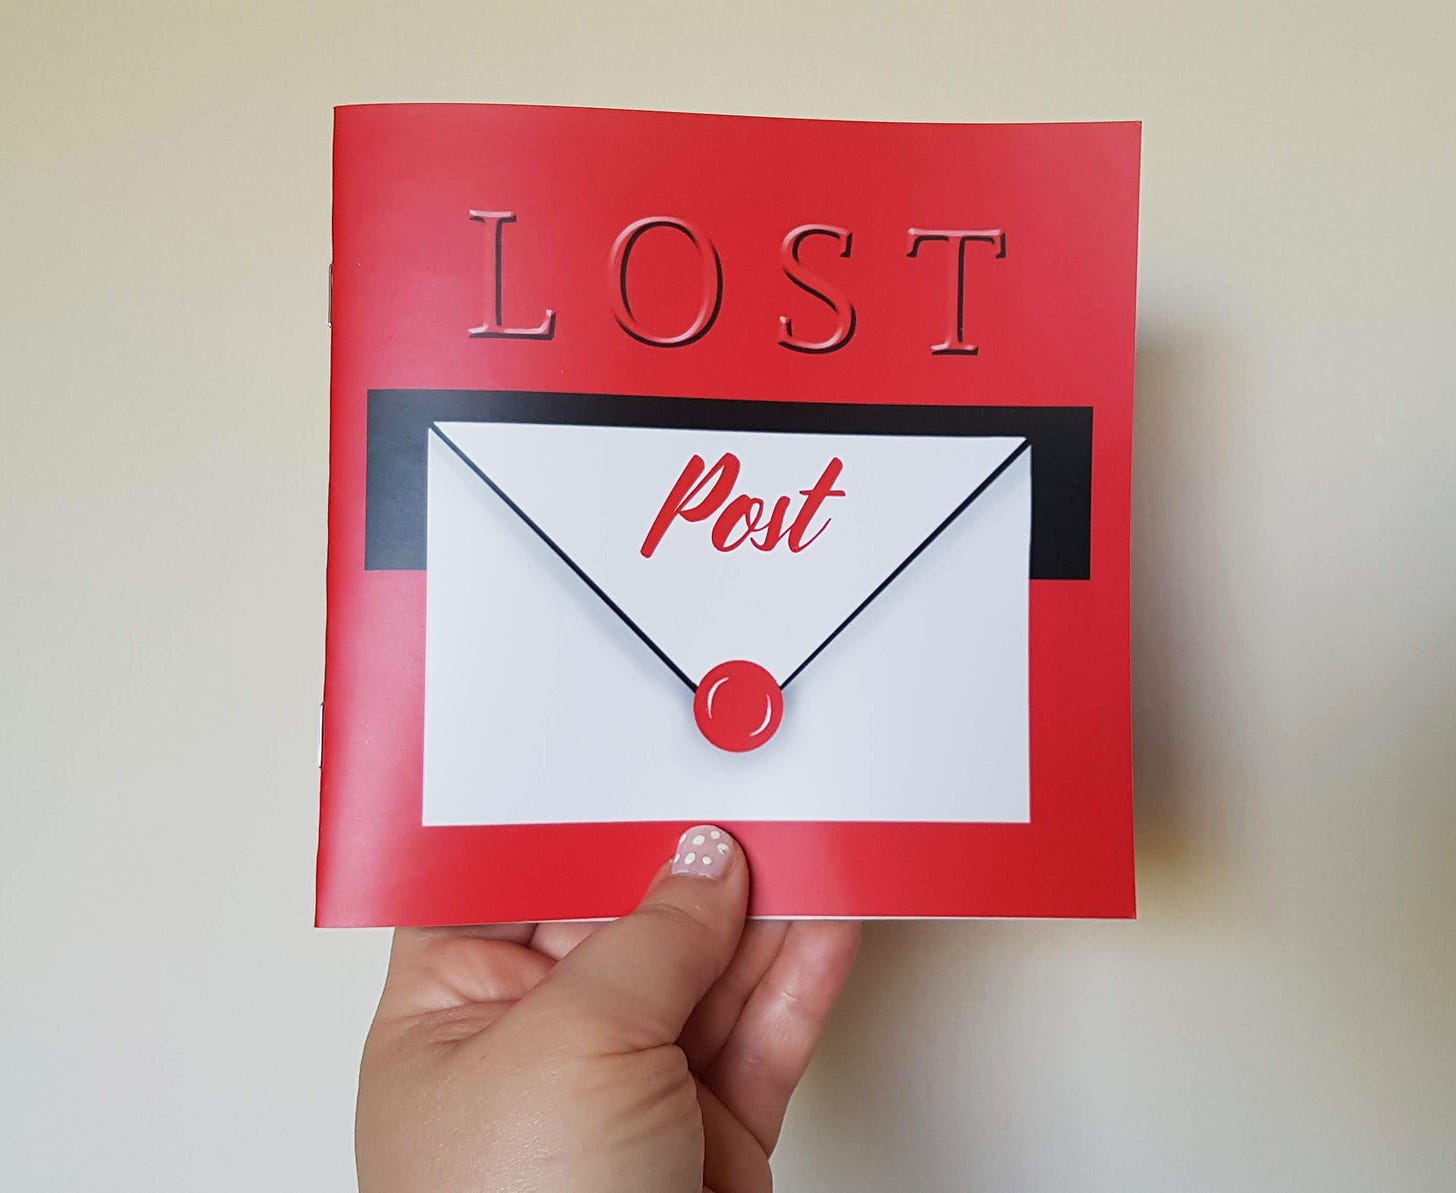 Cover of Lost Post, which looks like a red post box with a white envelope being posted through the slot.